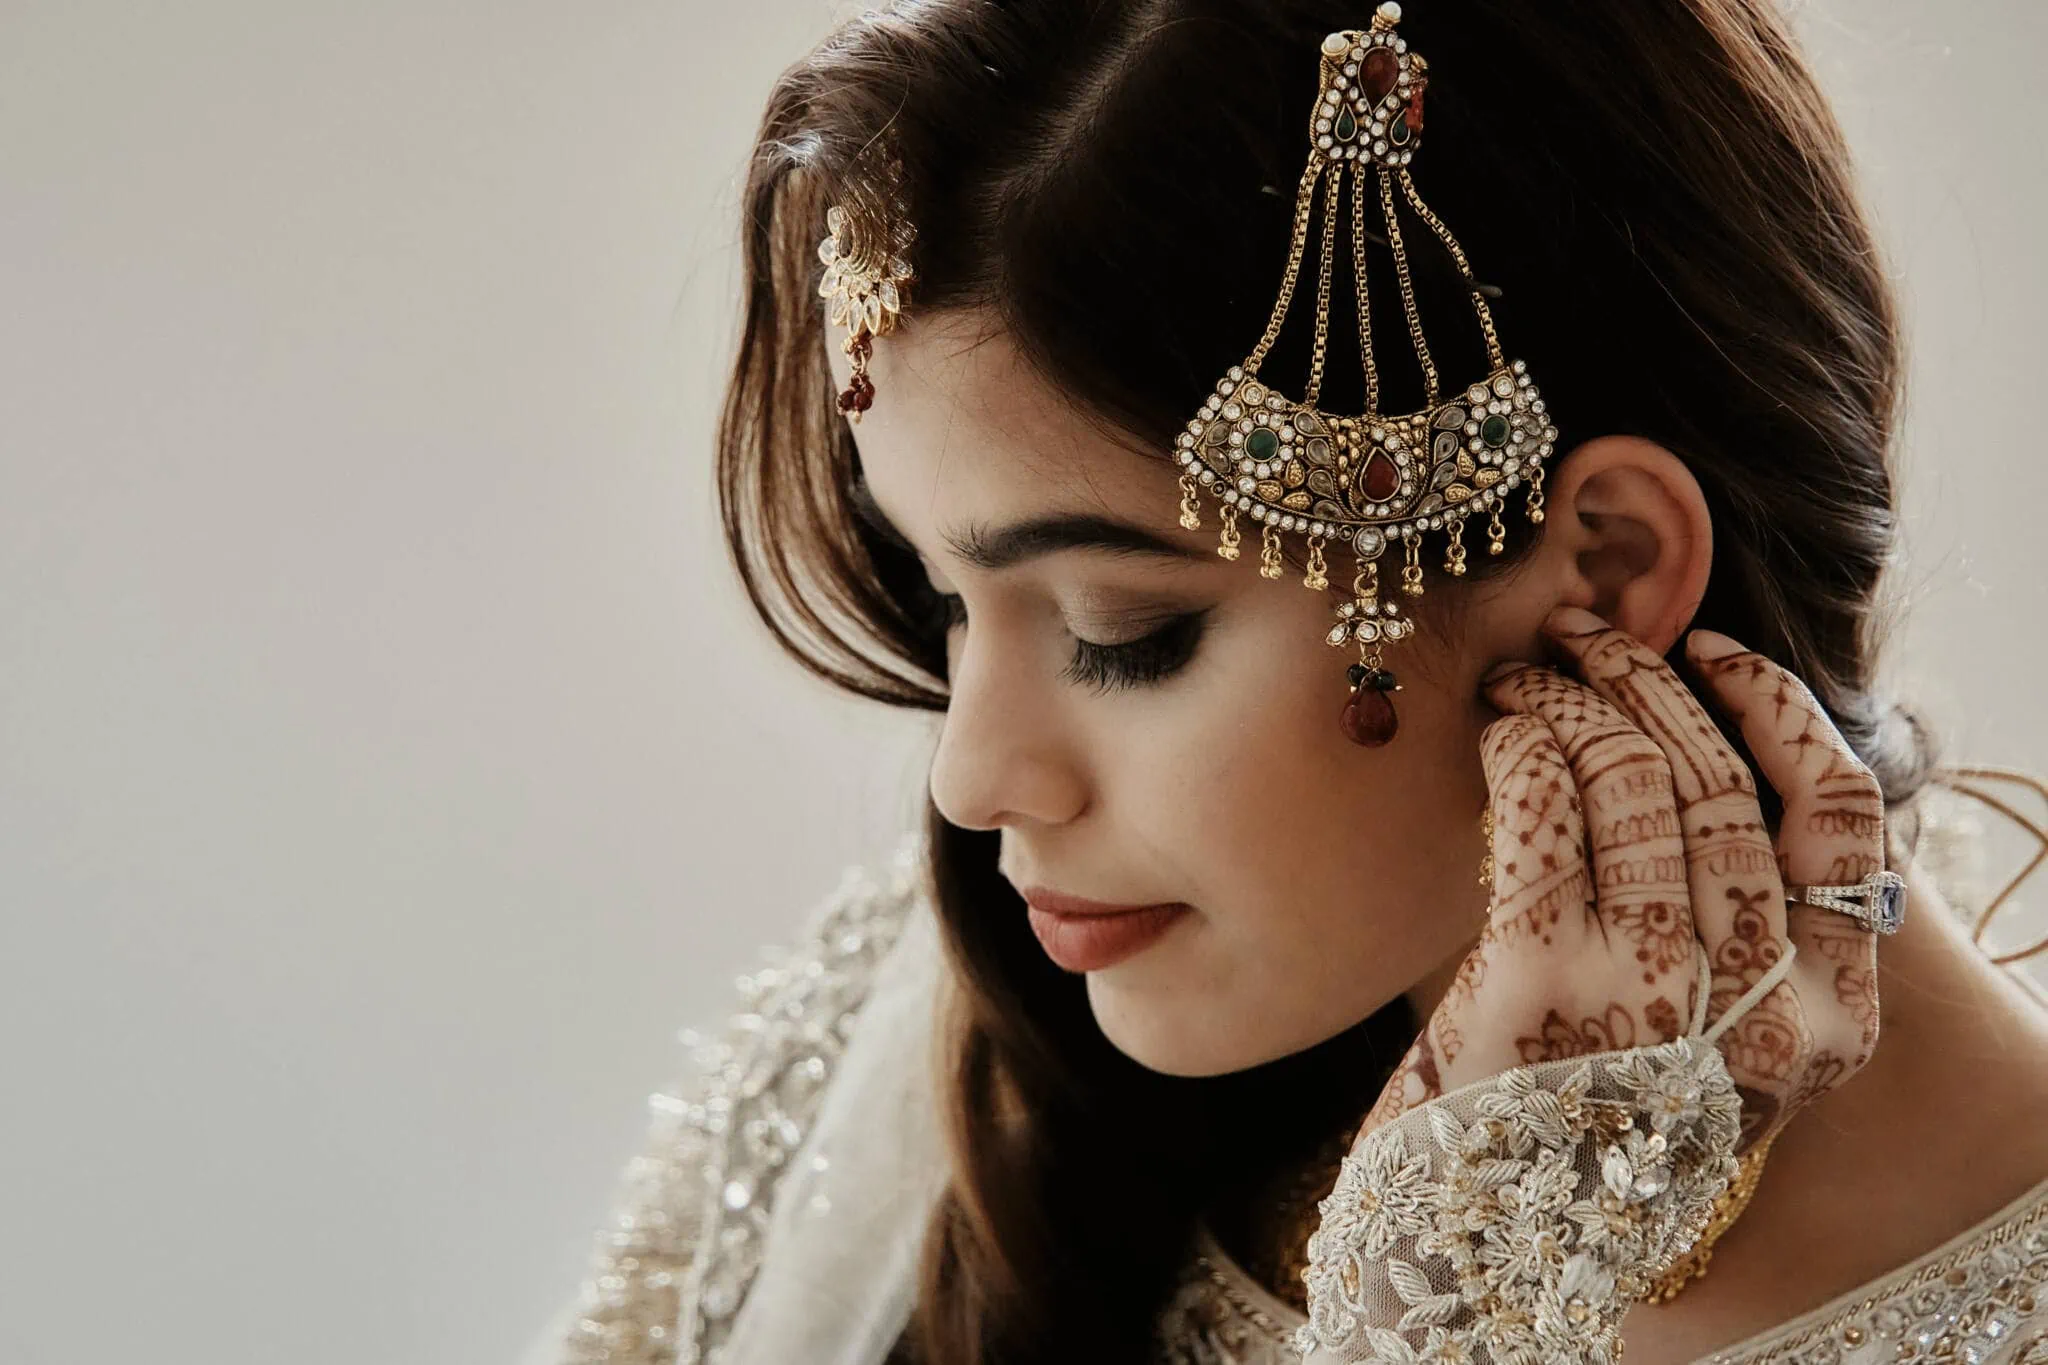 Queenstown New Zealand Elopement Wedding Photographer - Wasim and Yumn's Islamic Wedding featuring a Pakistani bride adorned in traditional bridal jewelry in Queenstown.